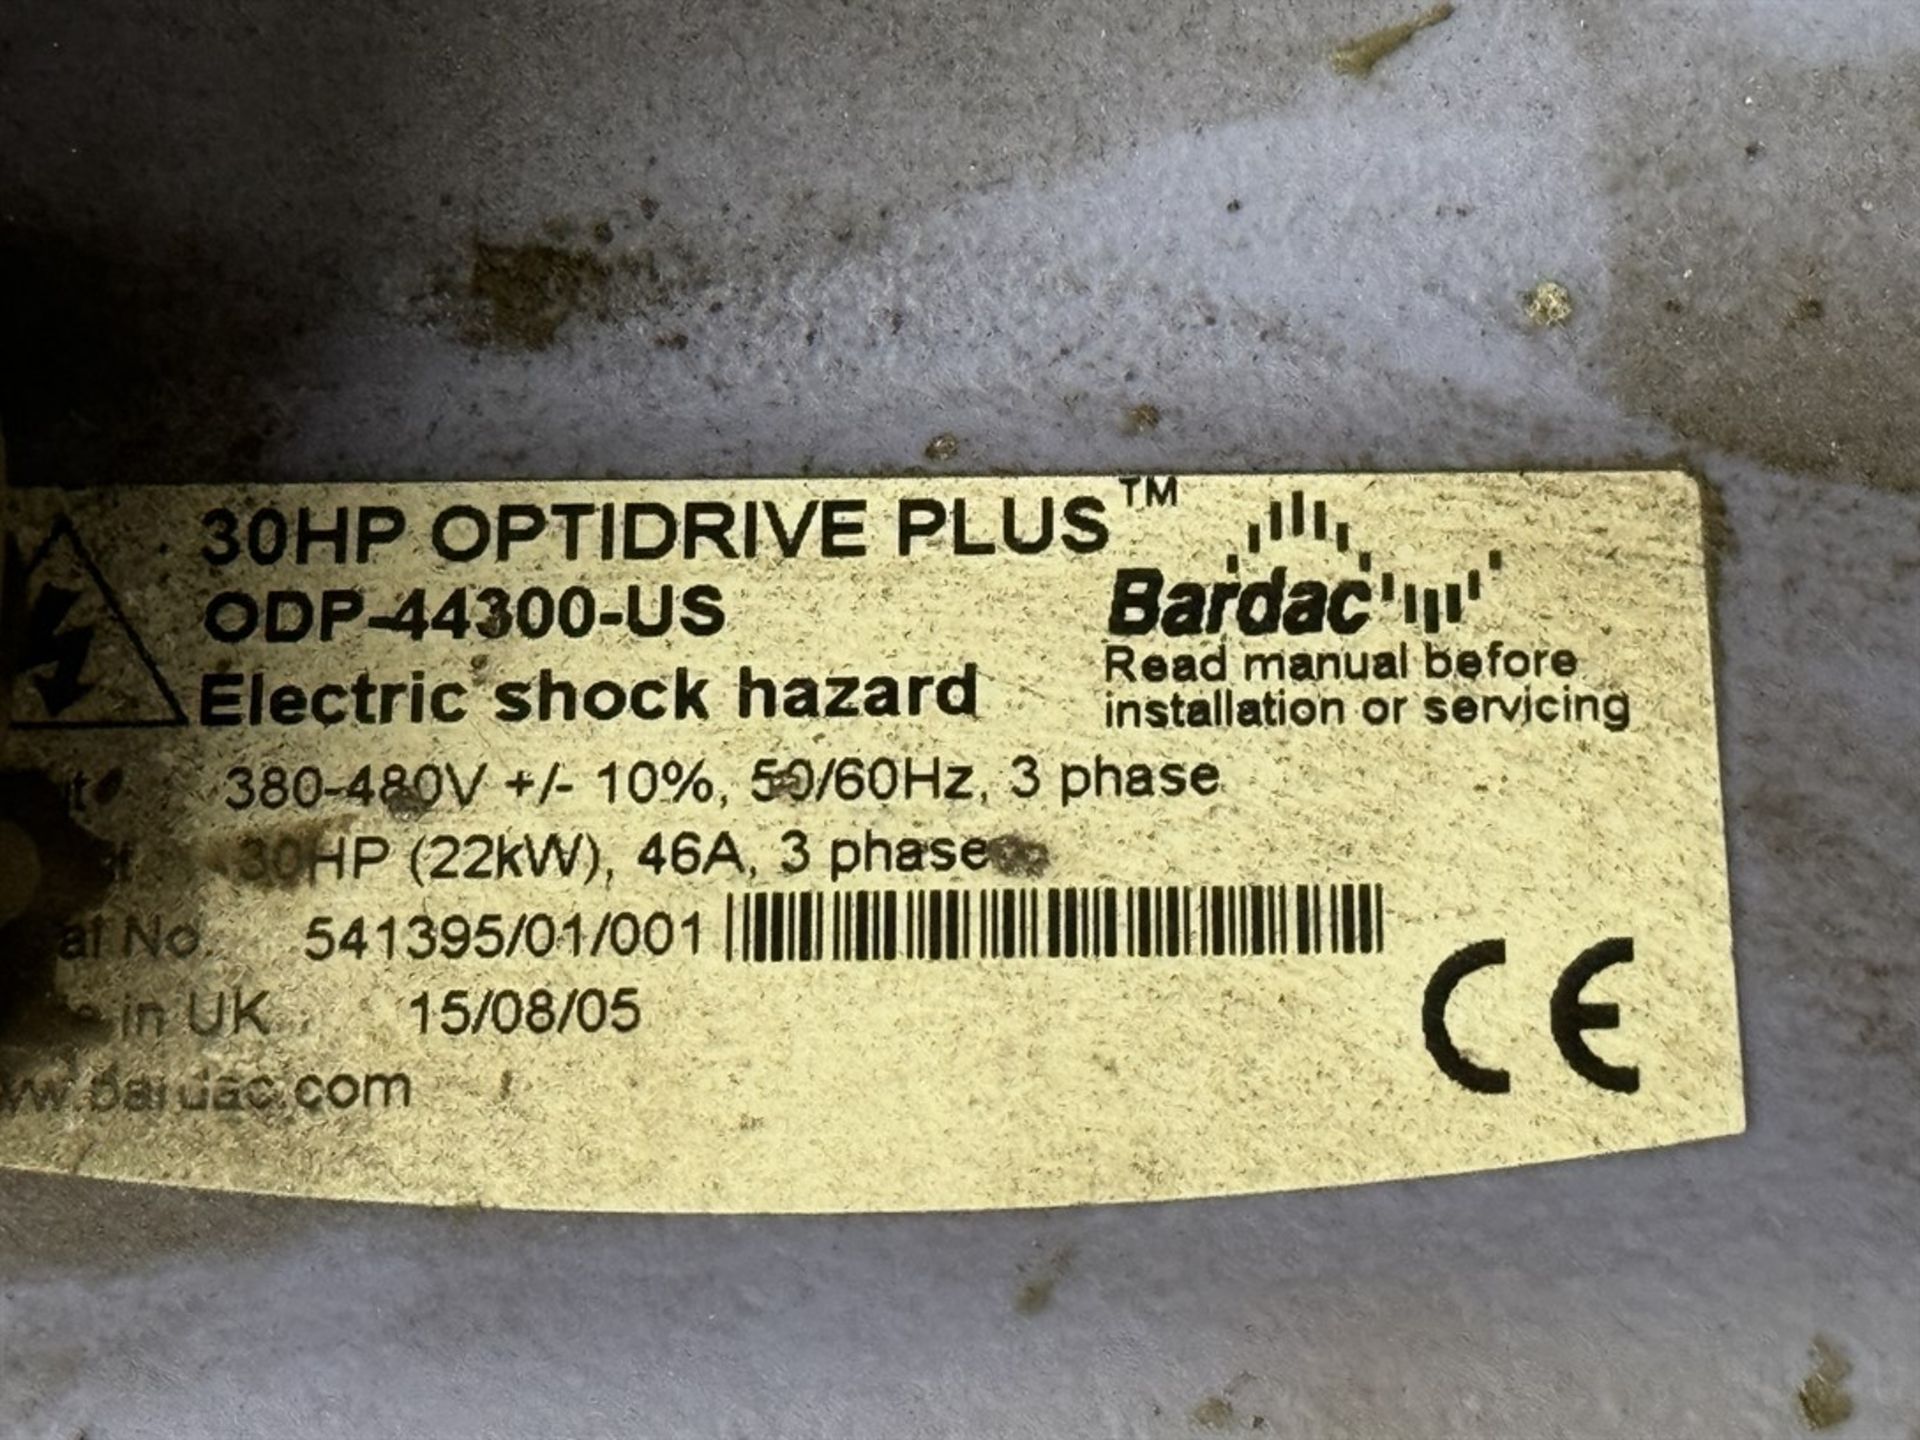 Lot Comprising 30 HP Optidrive Plus ODP-44300-US Drive and Speed Control - Image 5 of 7